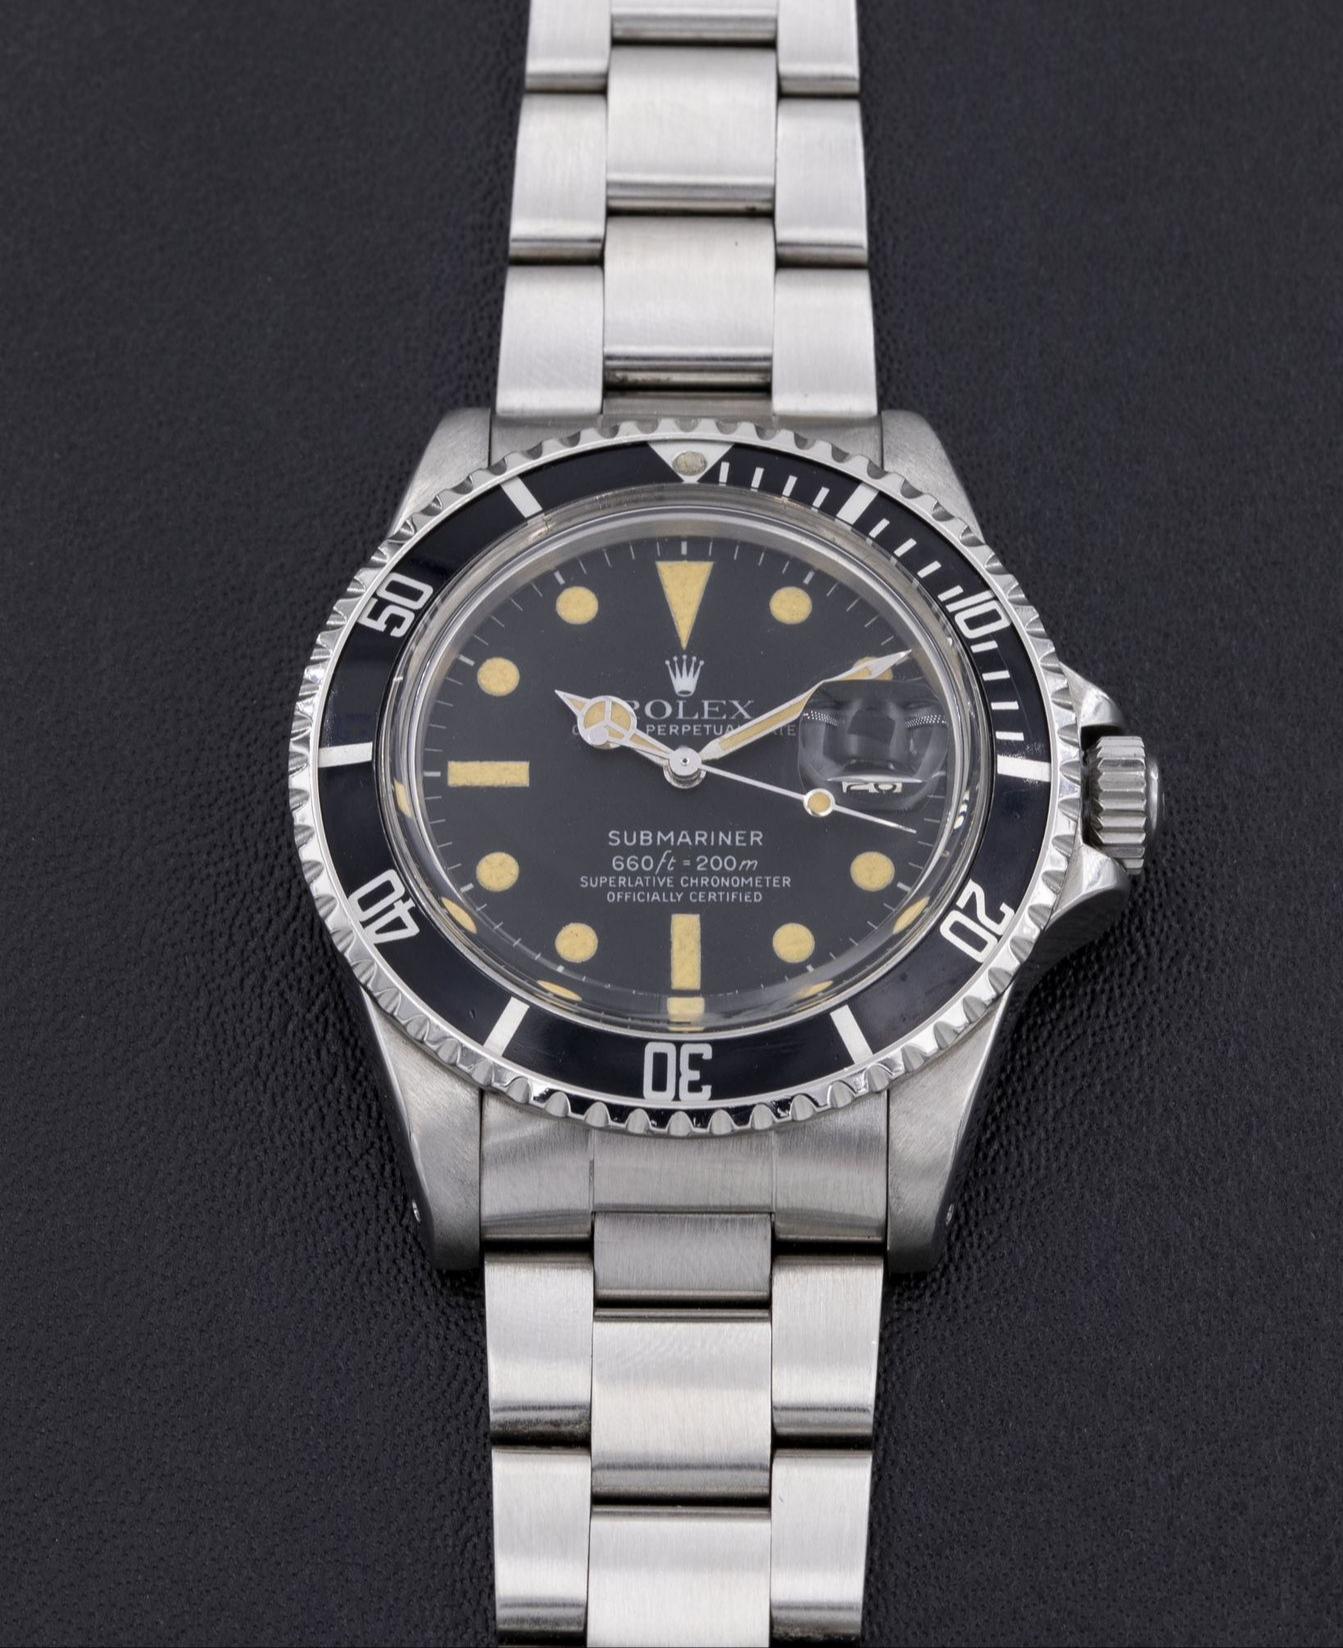 Fabolous Rolex Submariner 1680 
Year 1979
Splendid conditions of dial (extremely rare to find in these preserved conditions)
Case and movement are also in top conditions
Steel has been profesionally lightly polished
The watch has been expertised by